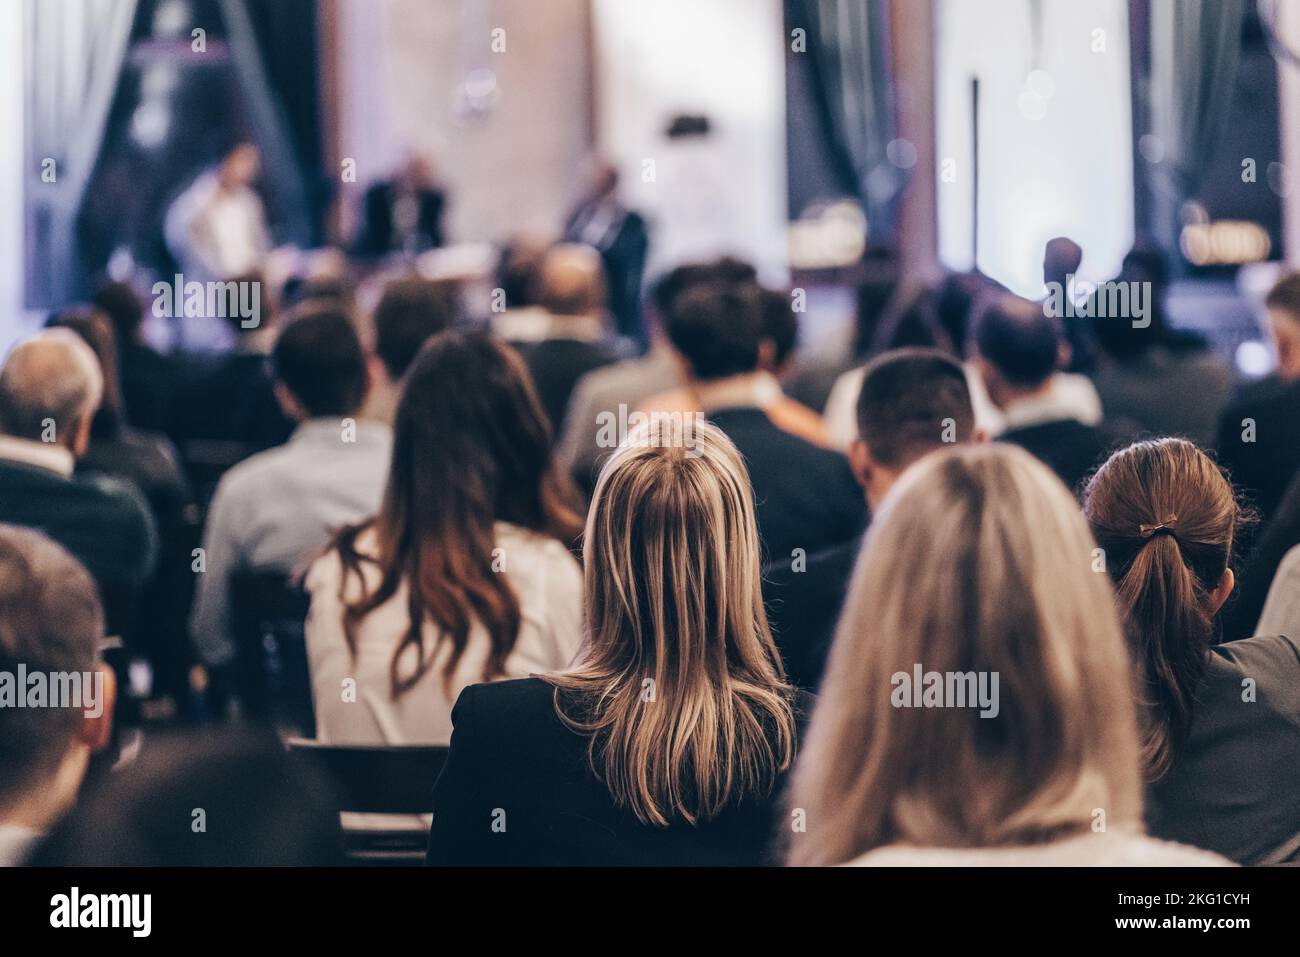 Round table discussion at business convention and Presentation. Audience at the conference hall. Business and entrepreneurship symposium. Stock Photo